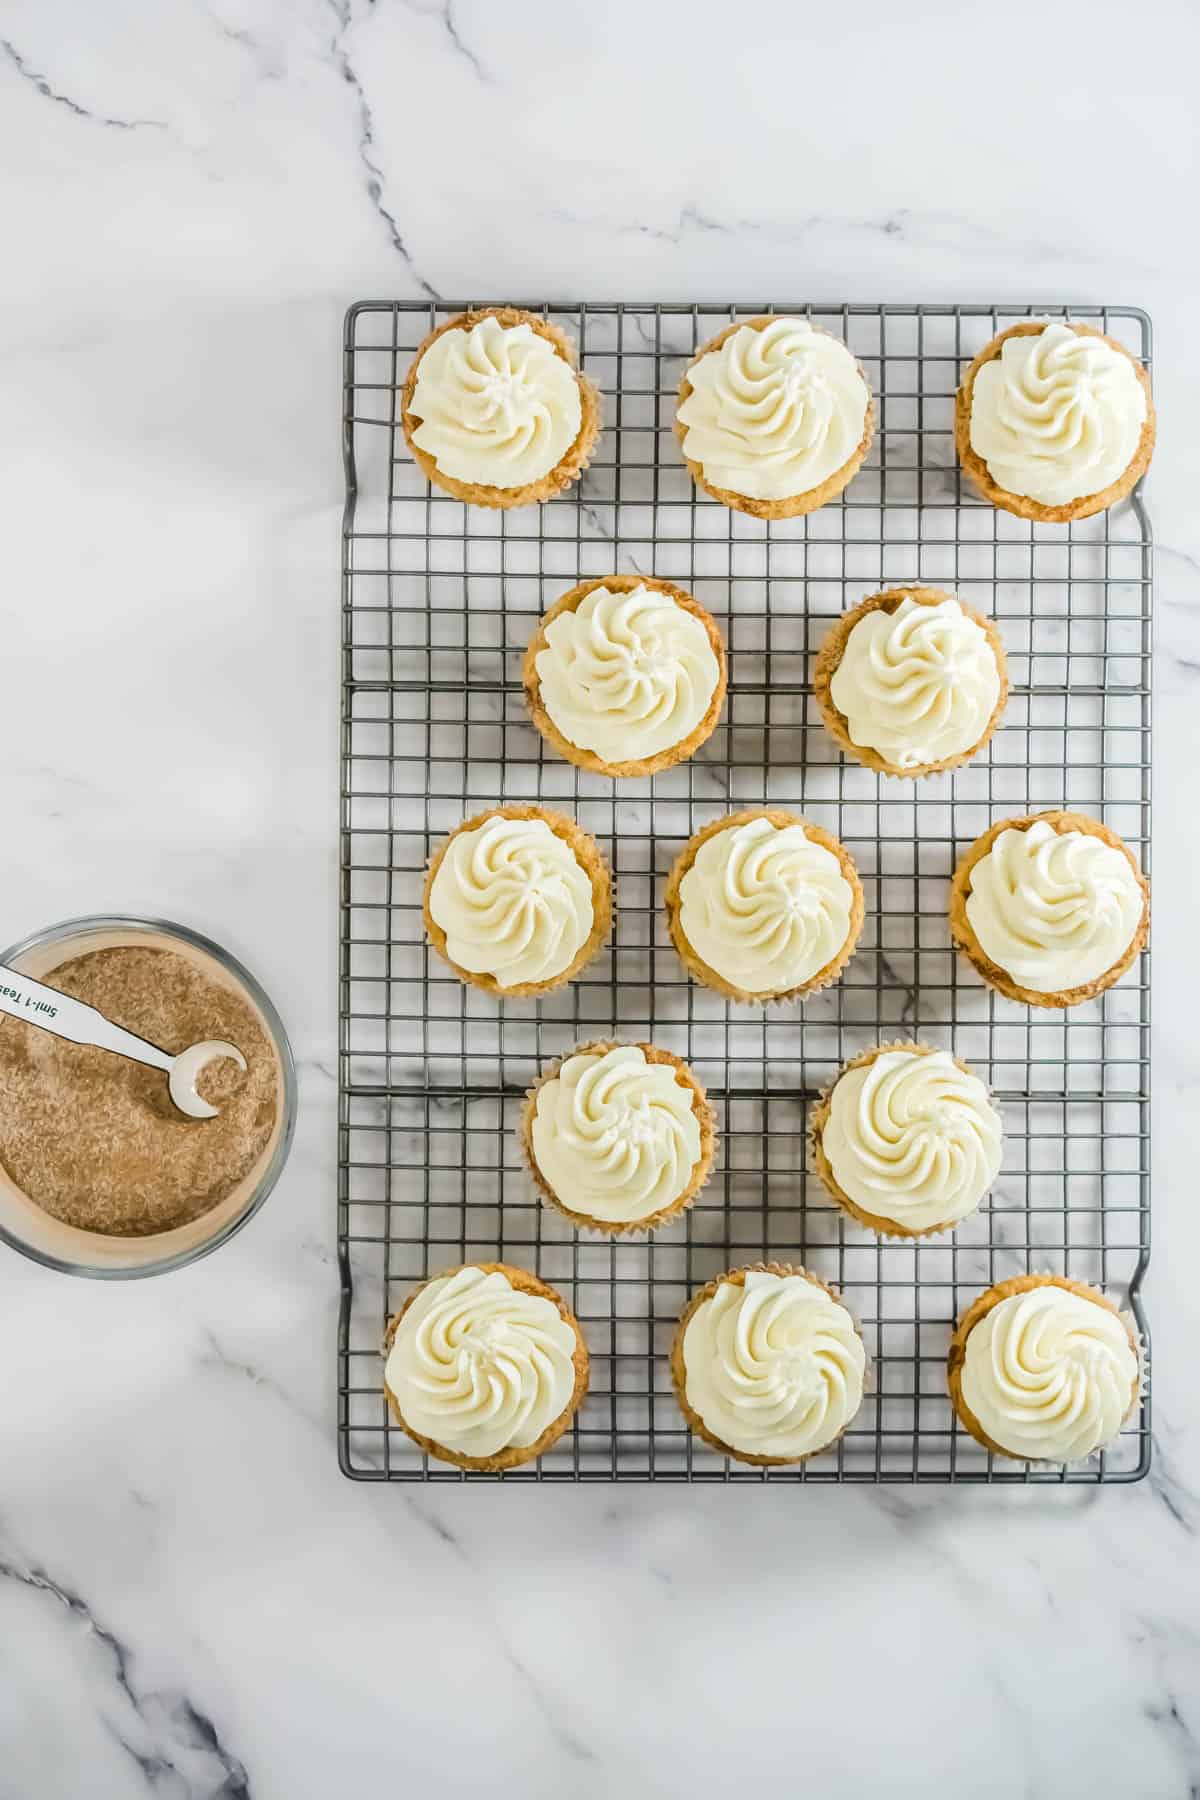 RumChata cupcakes topped with piped frosting on a wire rack.